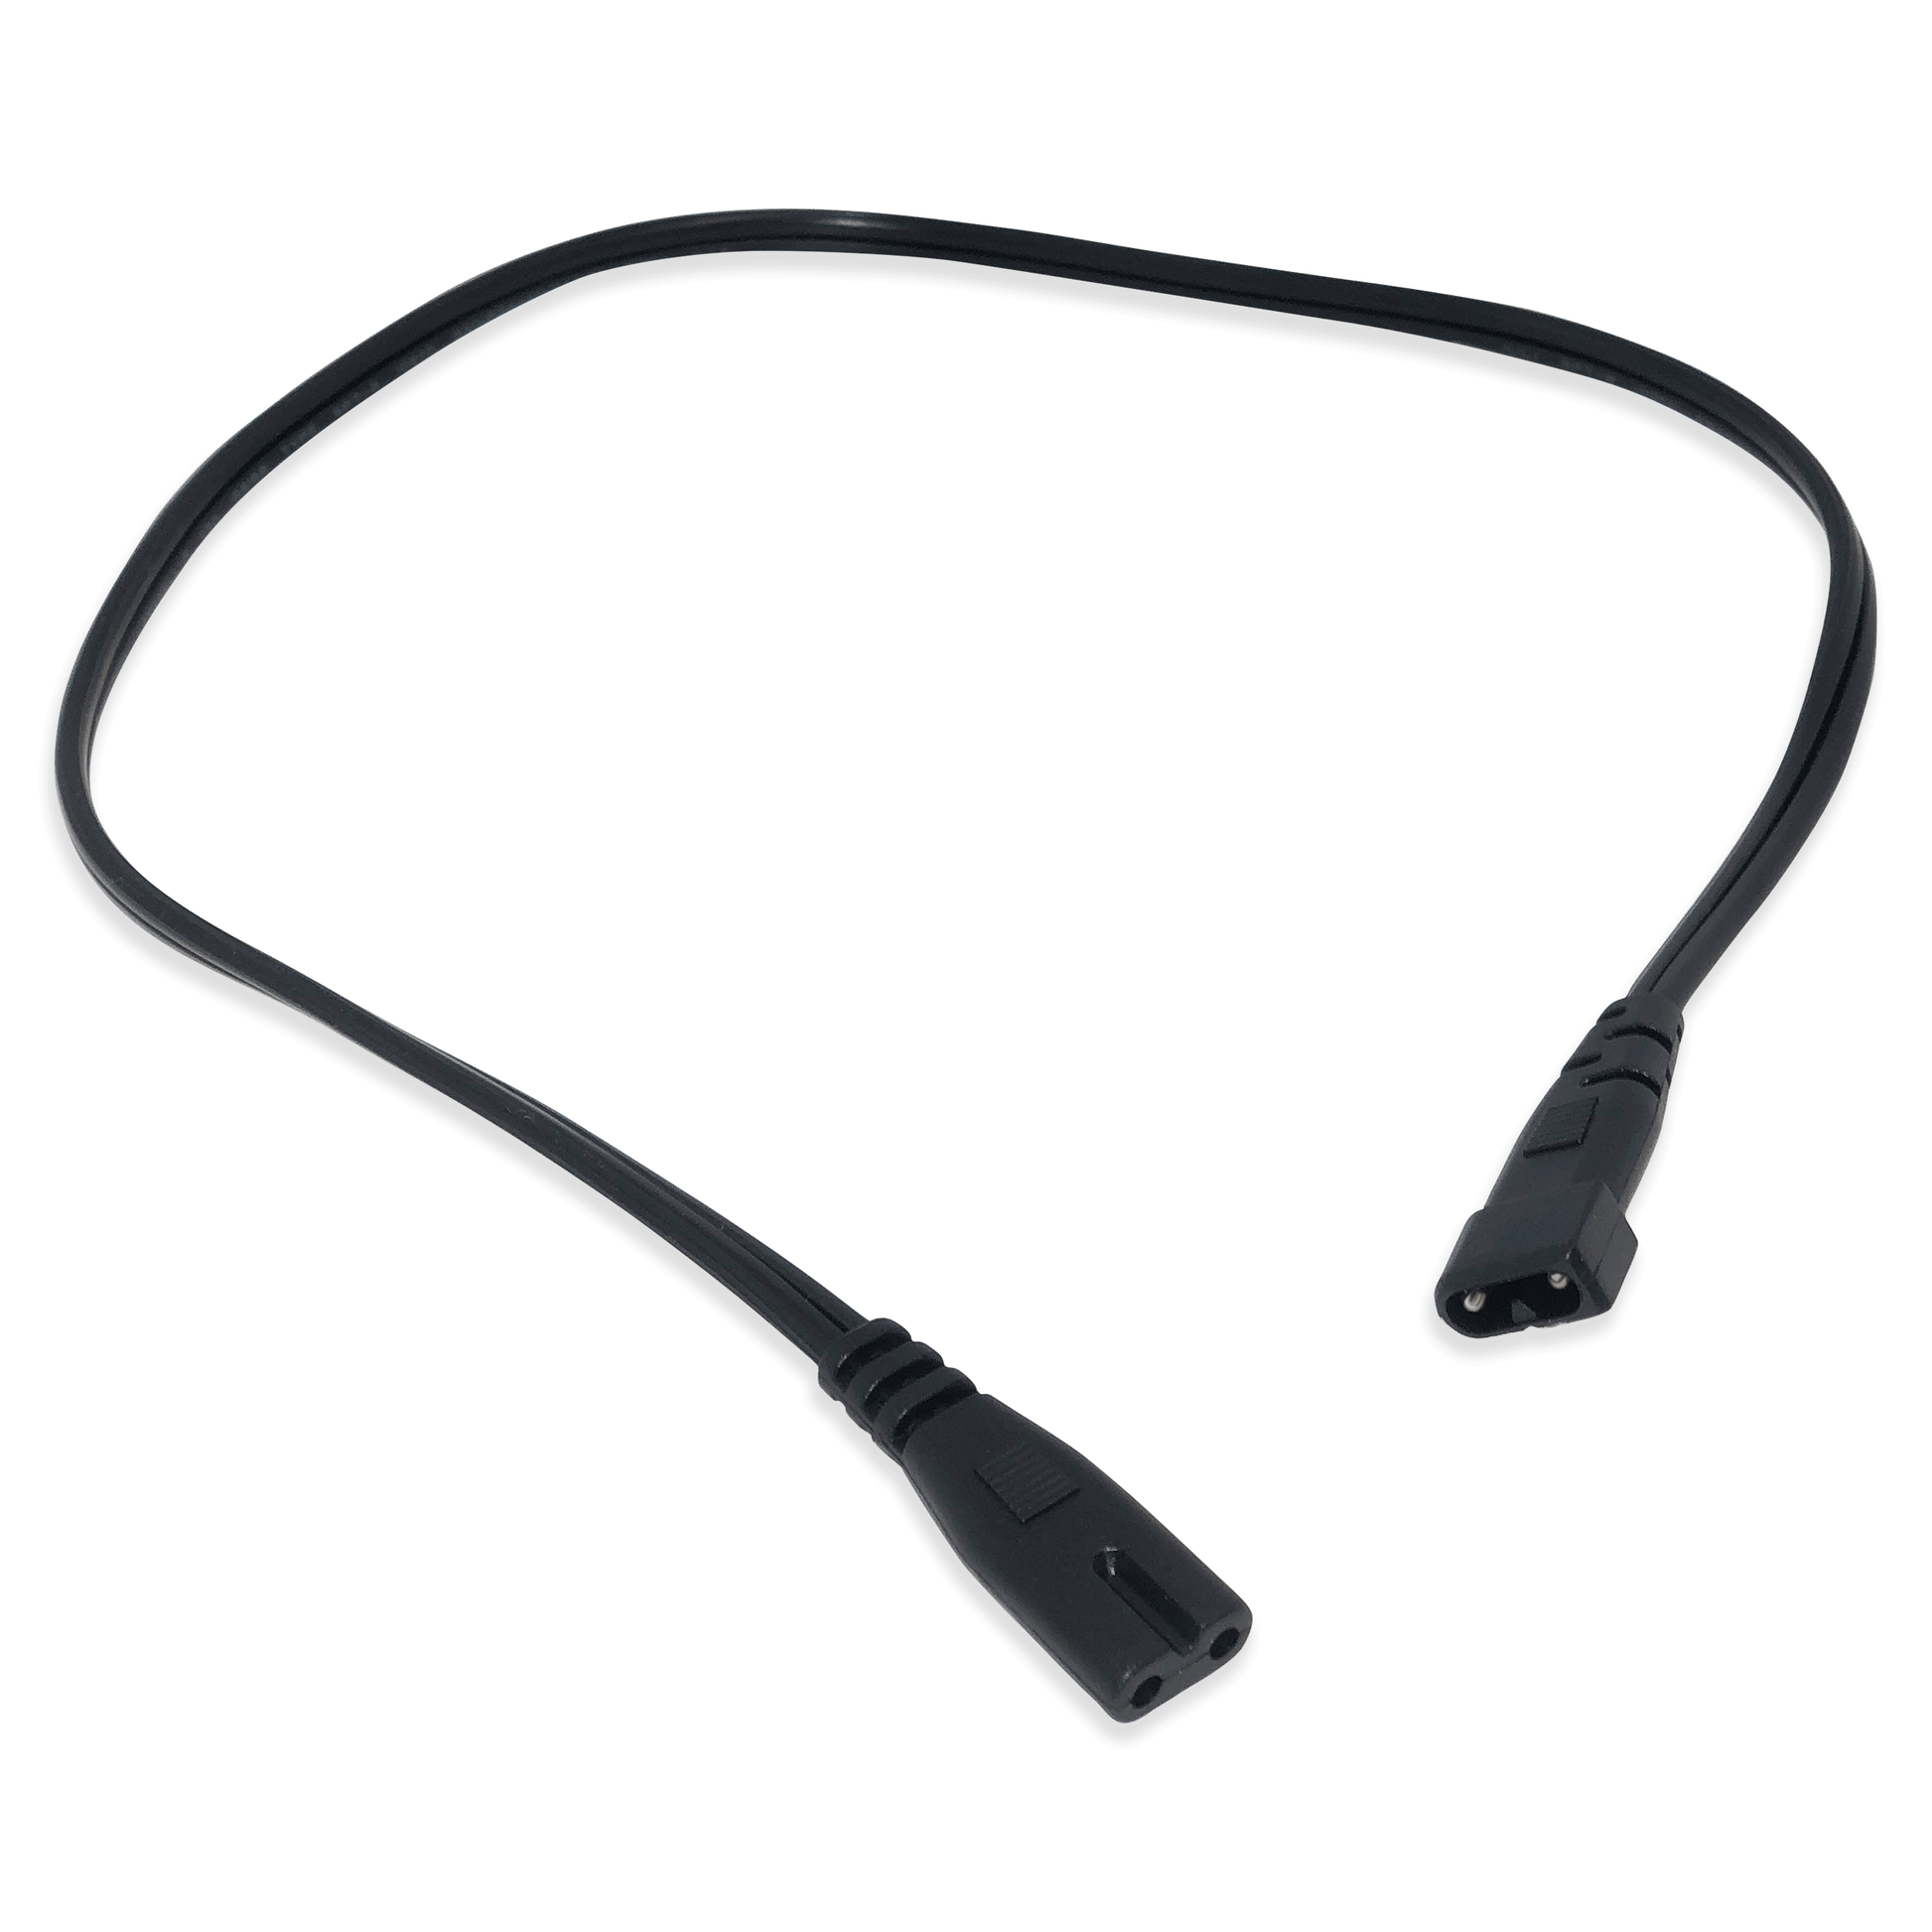 Ferry-Morse Grow Light Connector Cord Chain for linking your growing lights together.